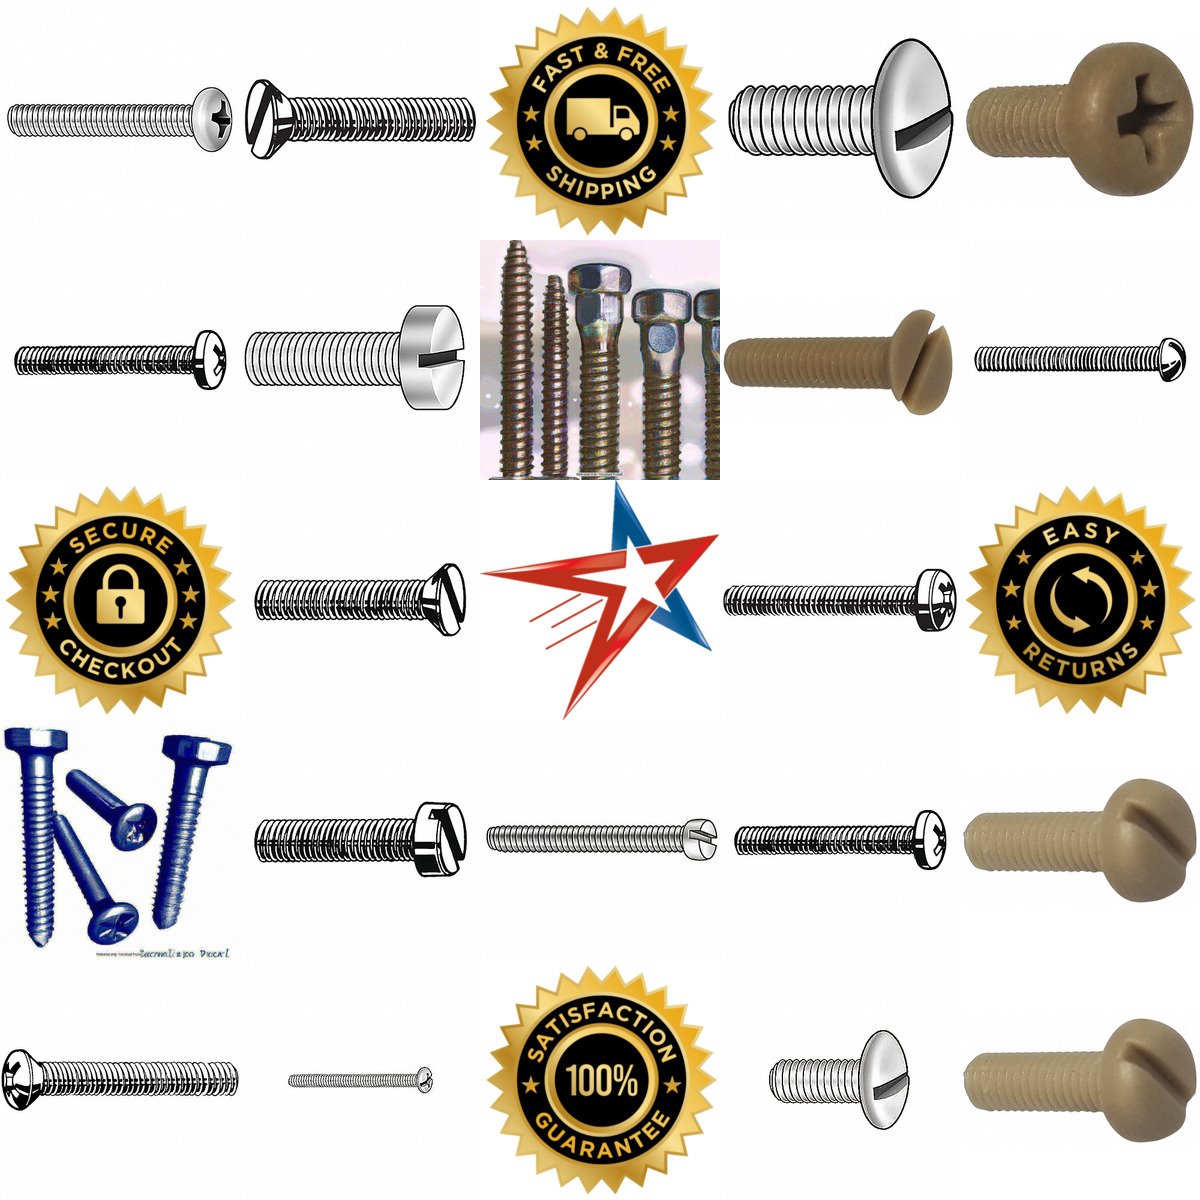 A selection of Standard Machine Screws products on GoVets